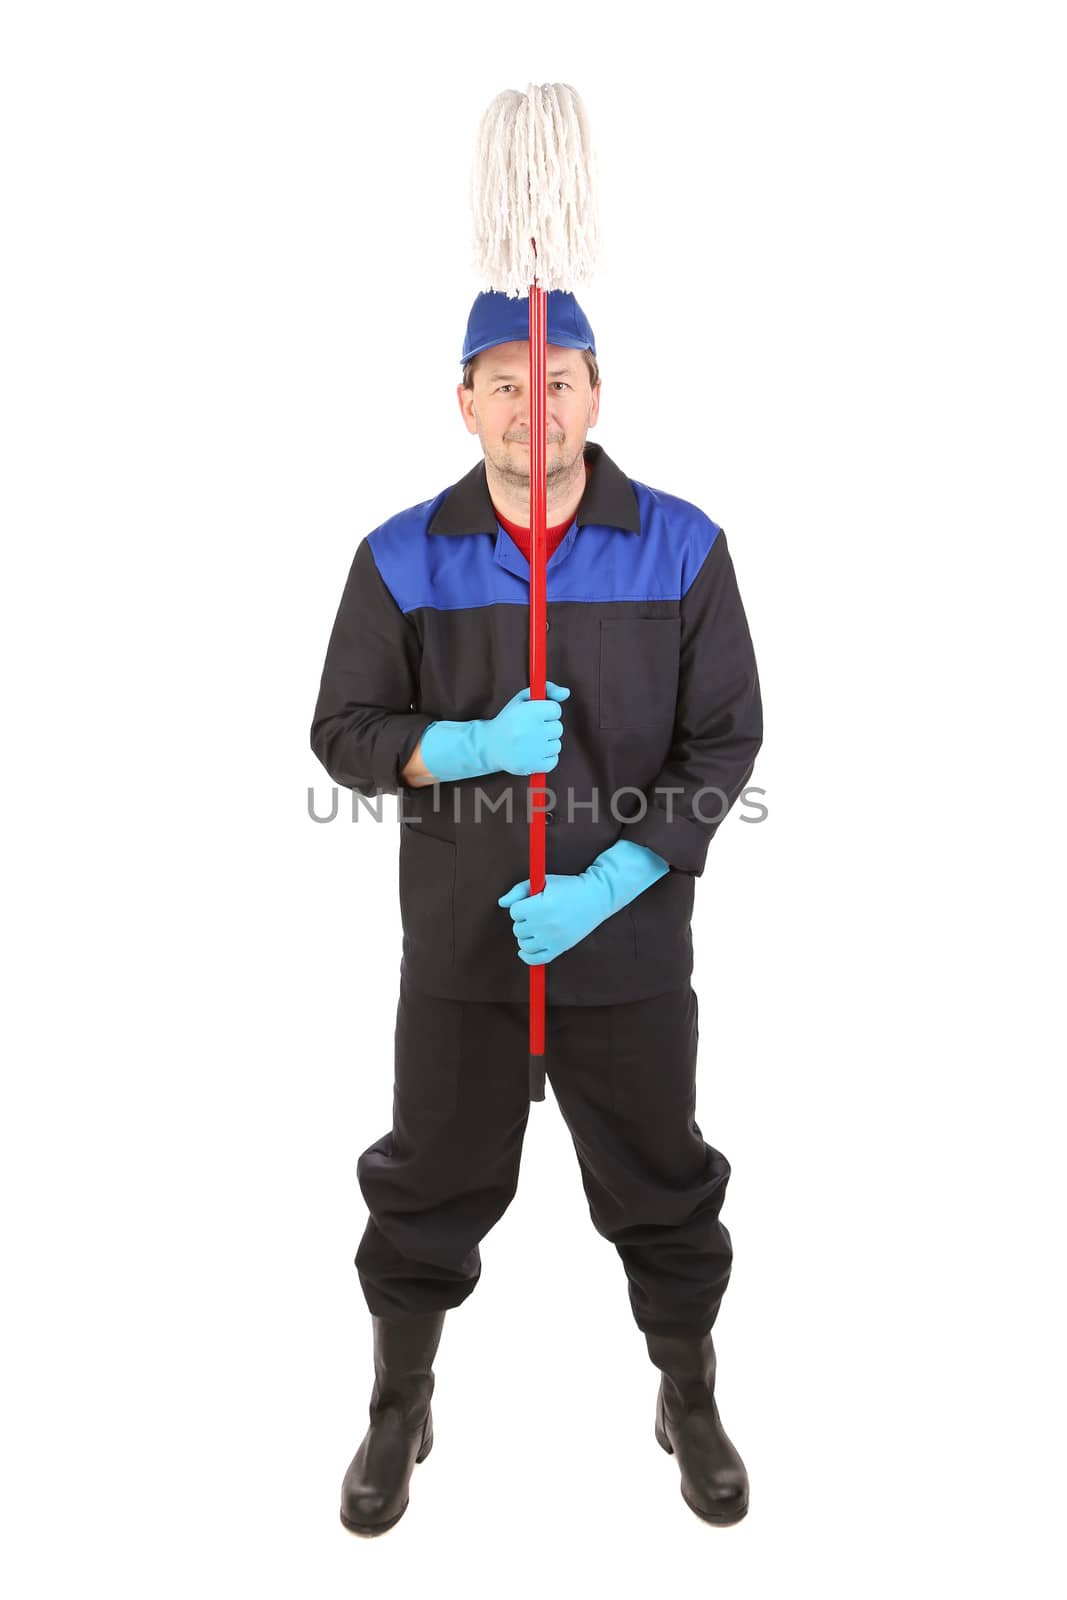 Man holding mop. Isolated on a white background.